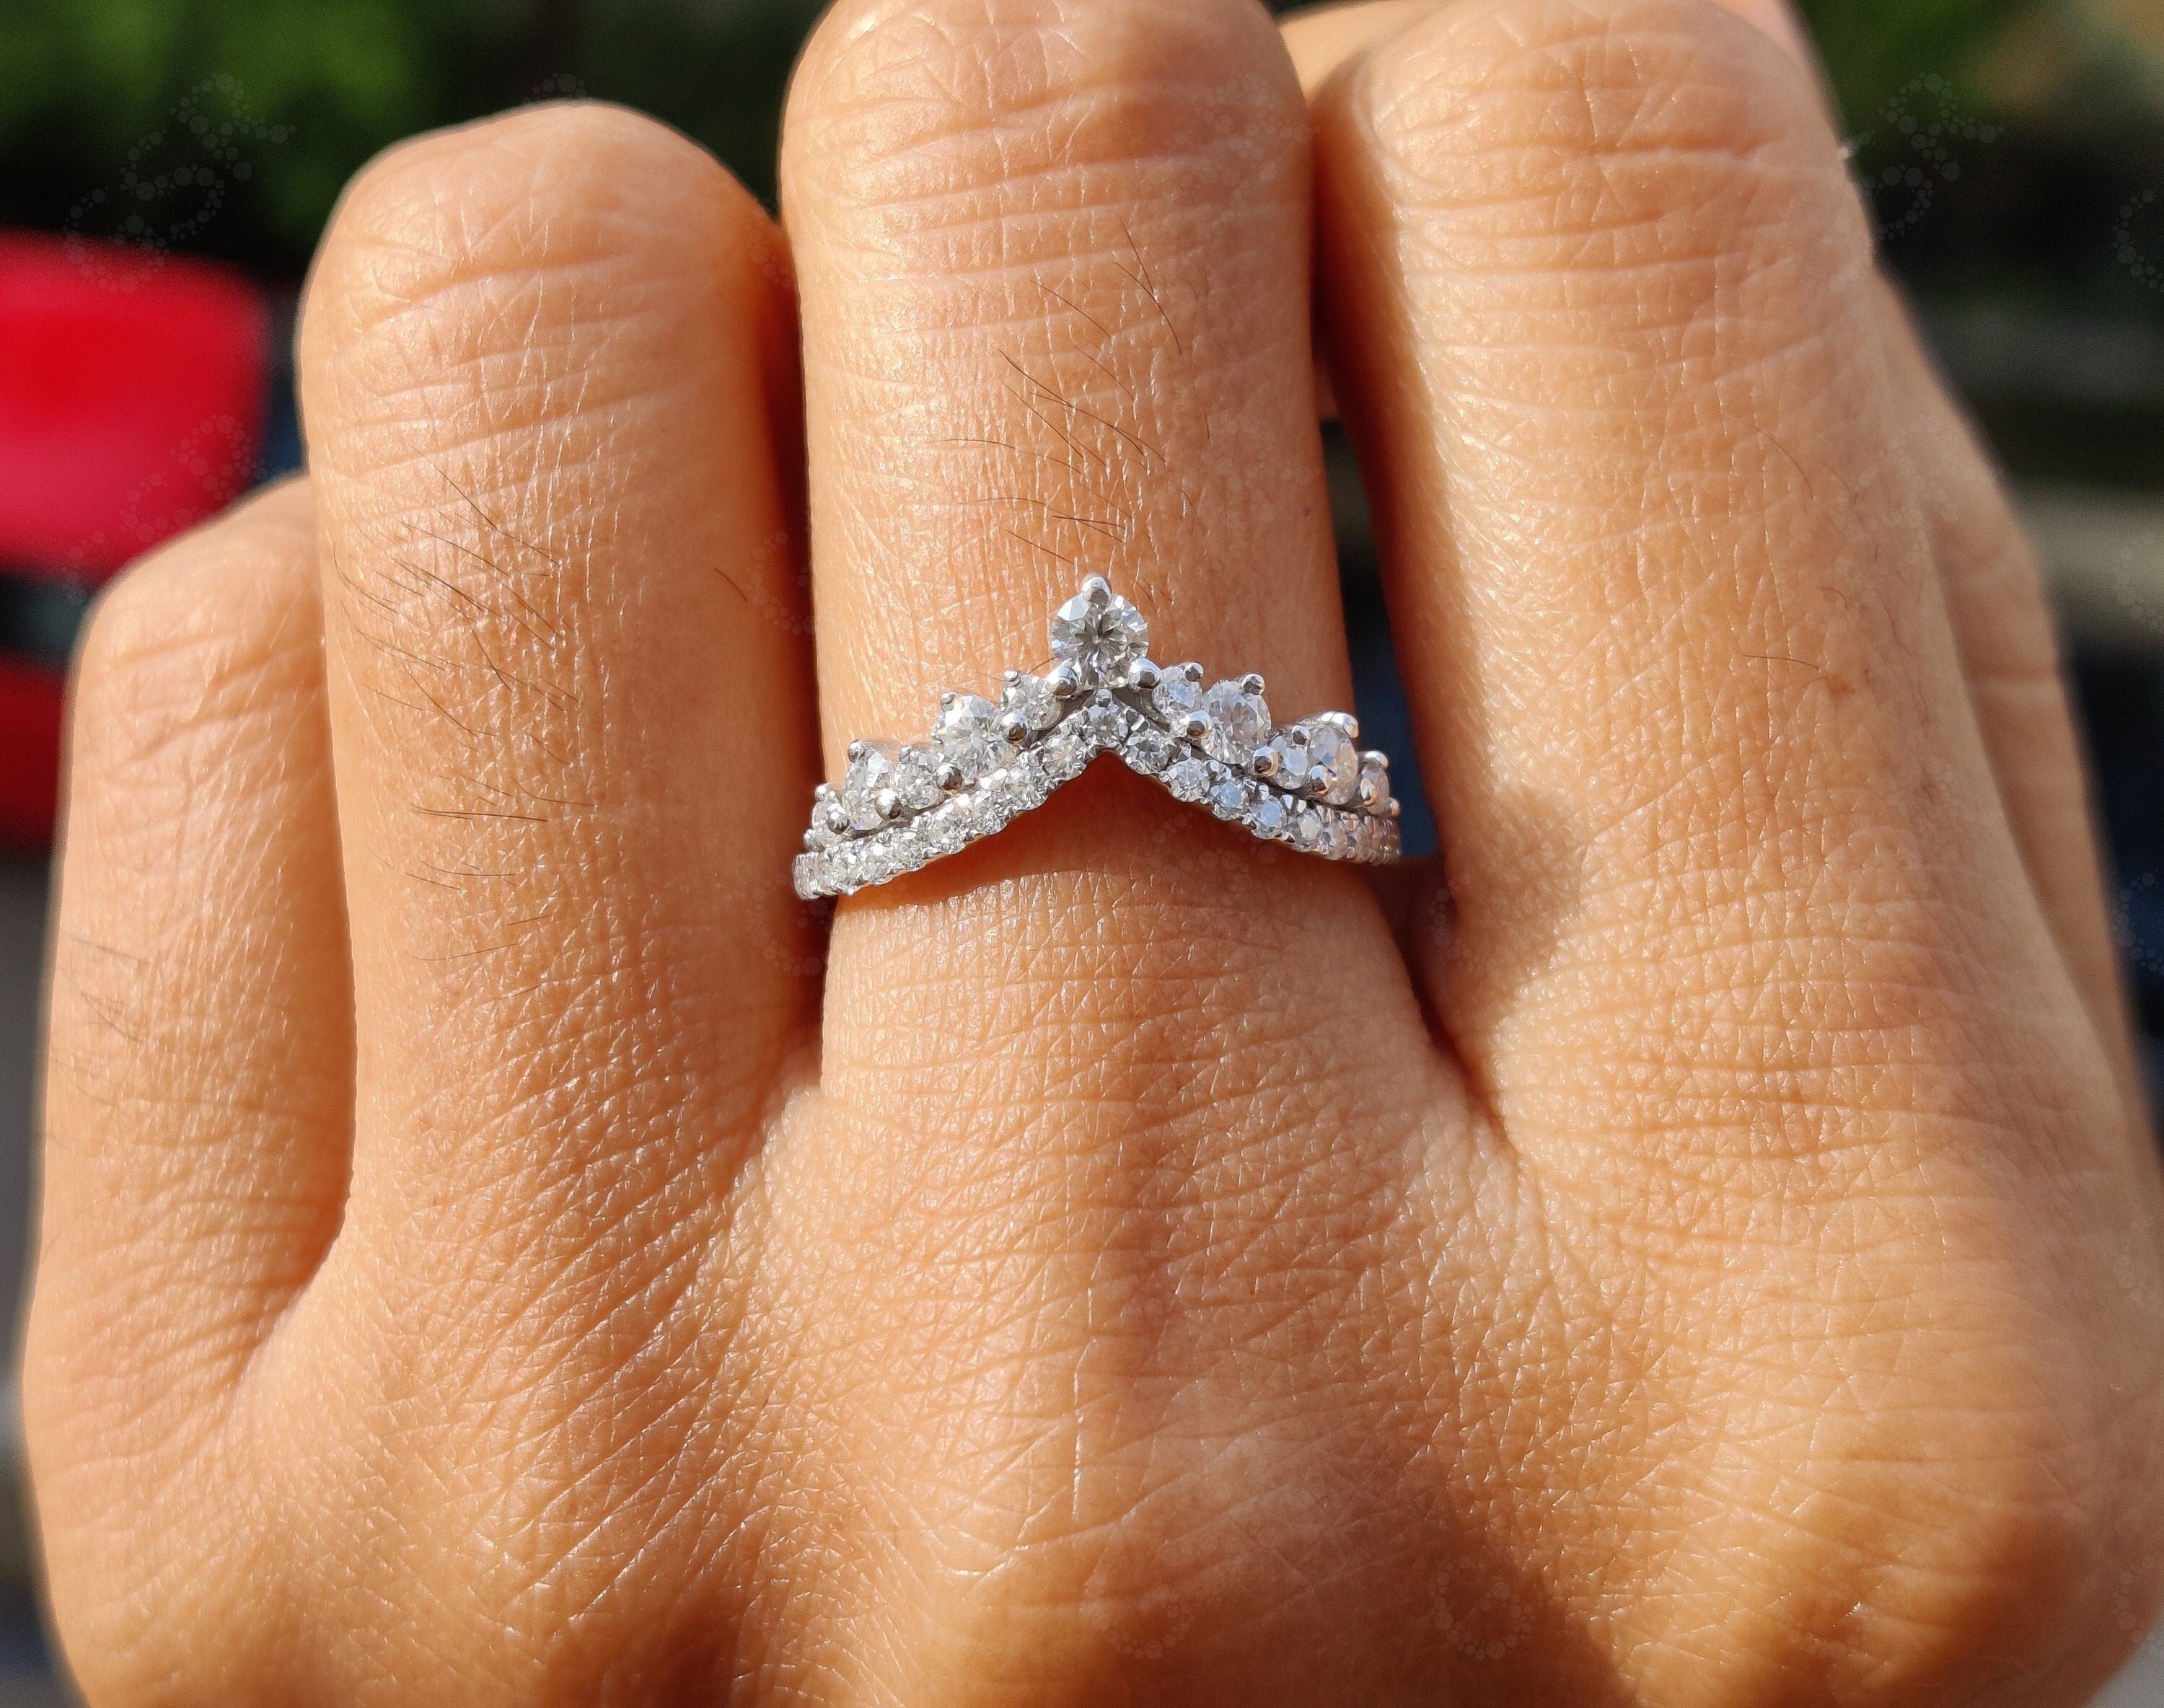 Vintage Chevron Band: A Stunning V-Shaped Moissanite Curved Wedding Ring in Silver and White Gold – The Perfect Promise and Anniversary Gift